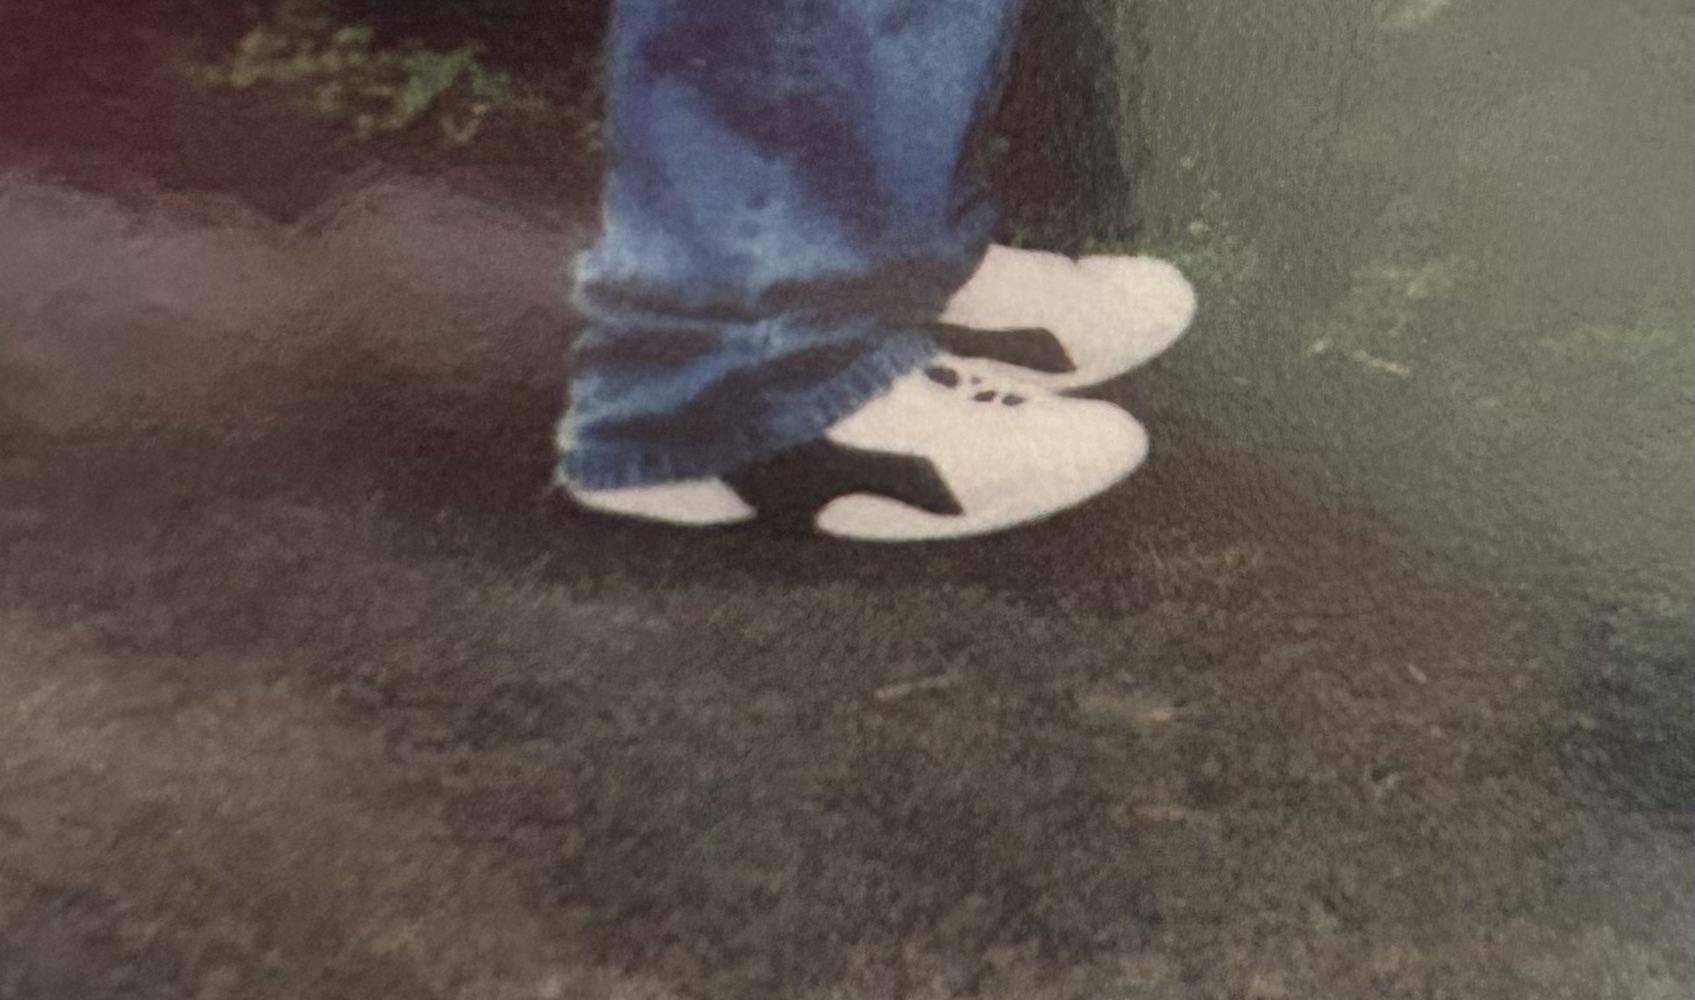 what type of shoes are these